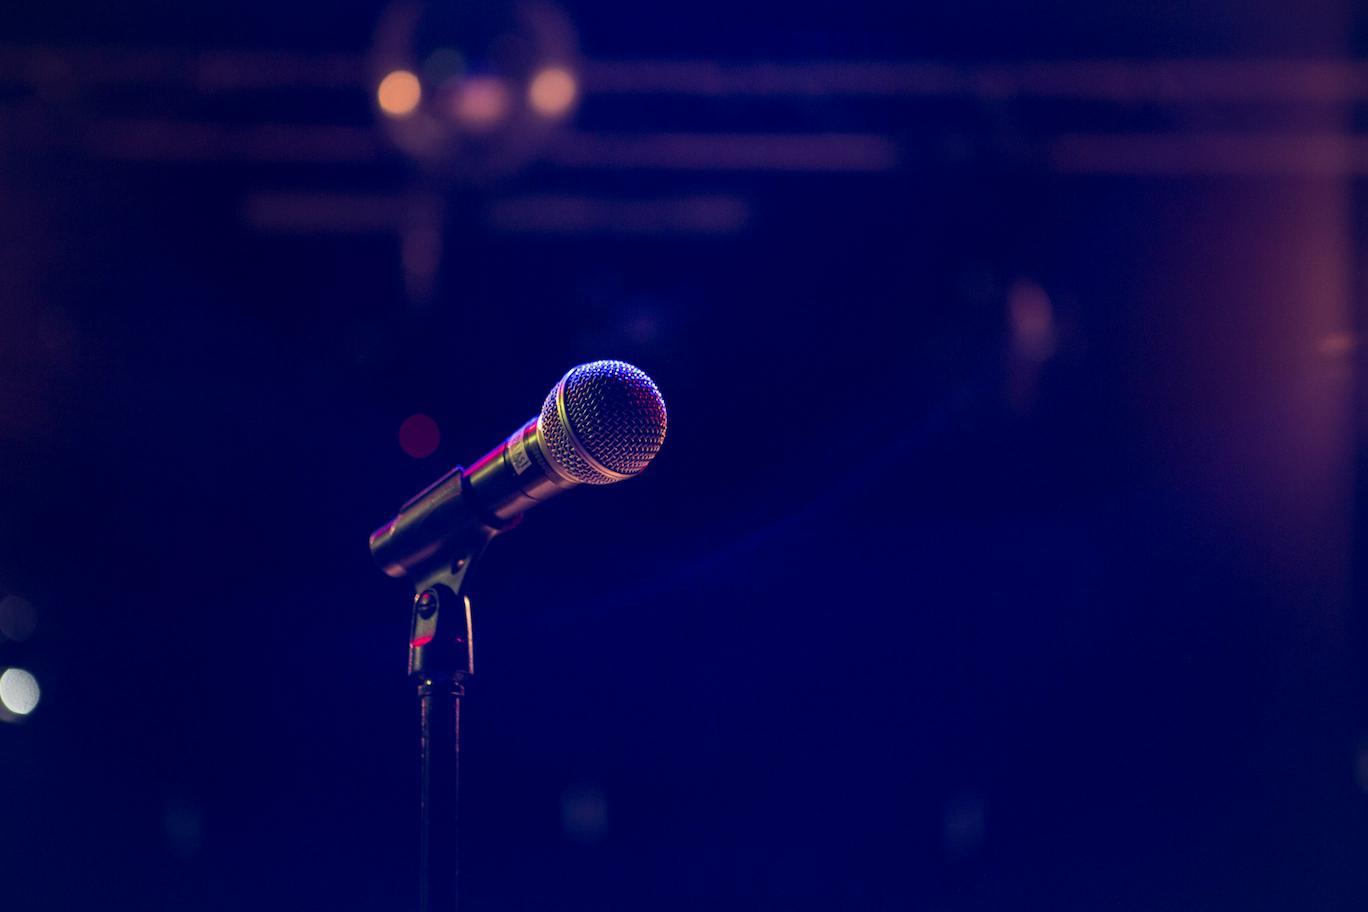 A microphone on a stand against a dark blue and pink bokeh background. Entrepreneur motivational speakers excel at customizing their messages to align with the specific goals and culture of an organization, a skill that turns a generic speech into a transformative experience for the audience.